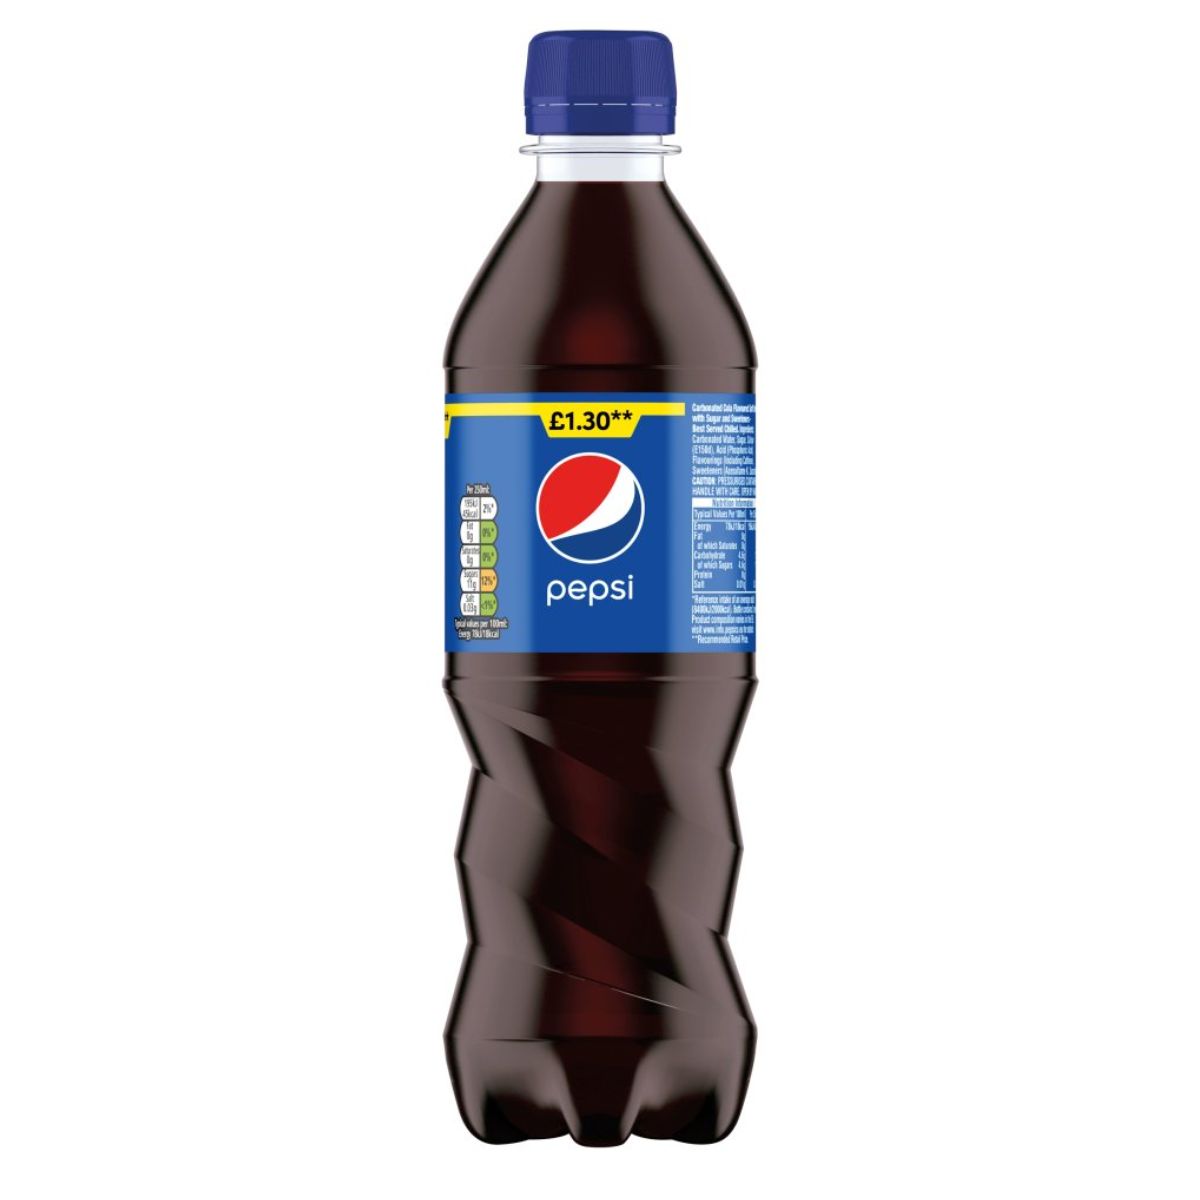 A bottle of Pepsi - Cola Bottle - 500ml on a white background.